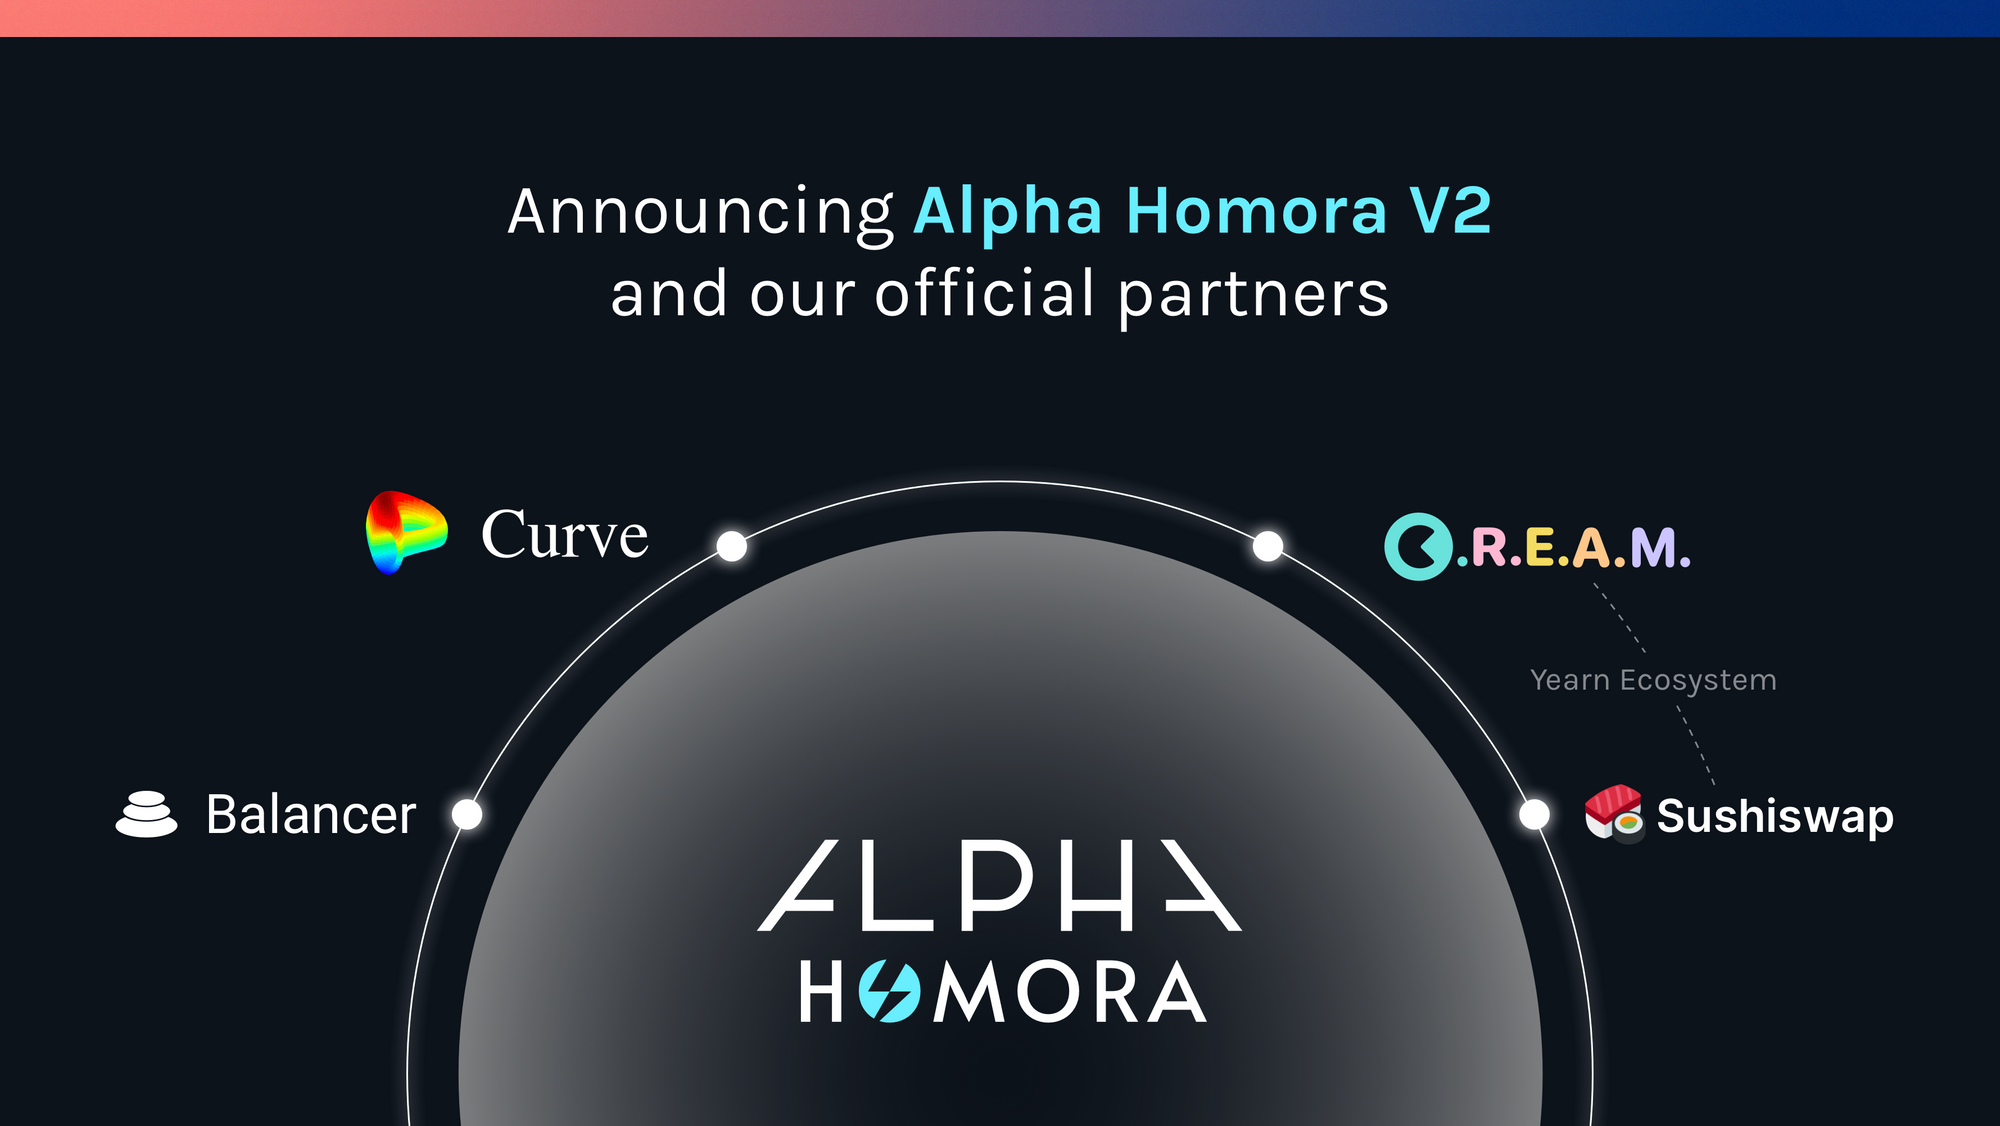 Alpha Homora V2 Is Coming To Town